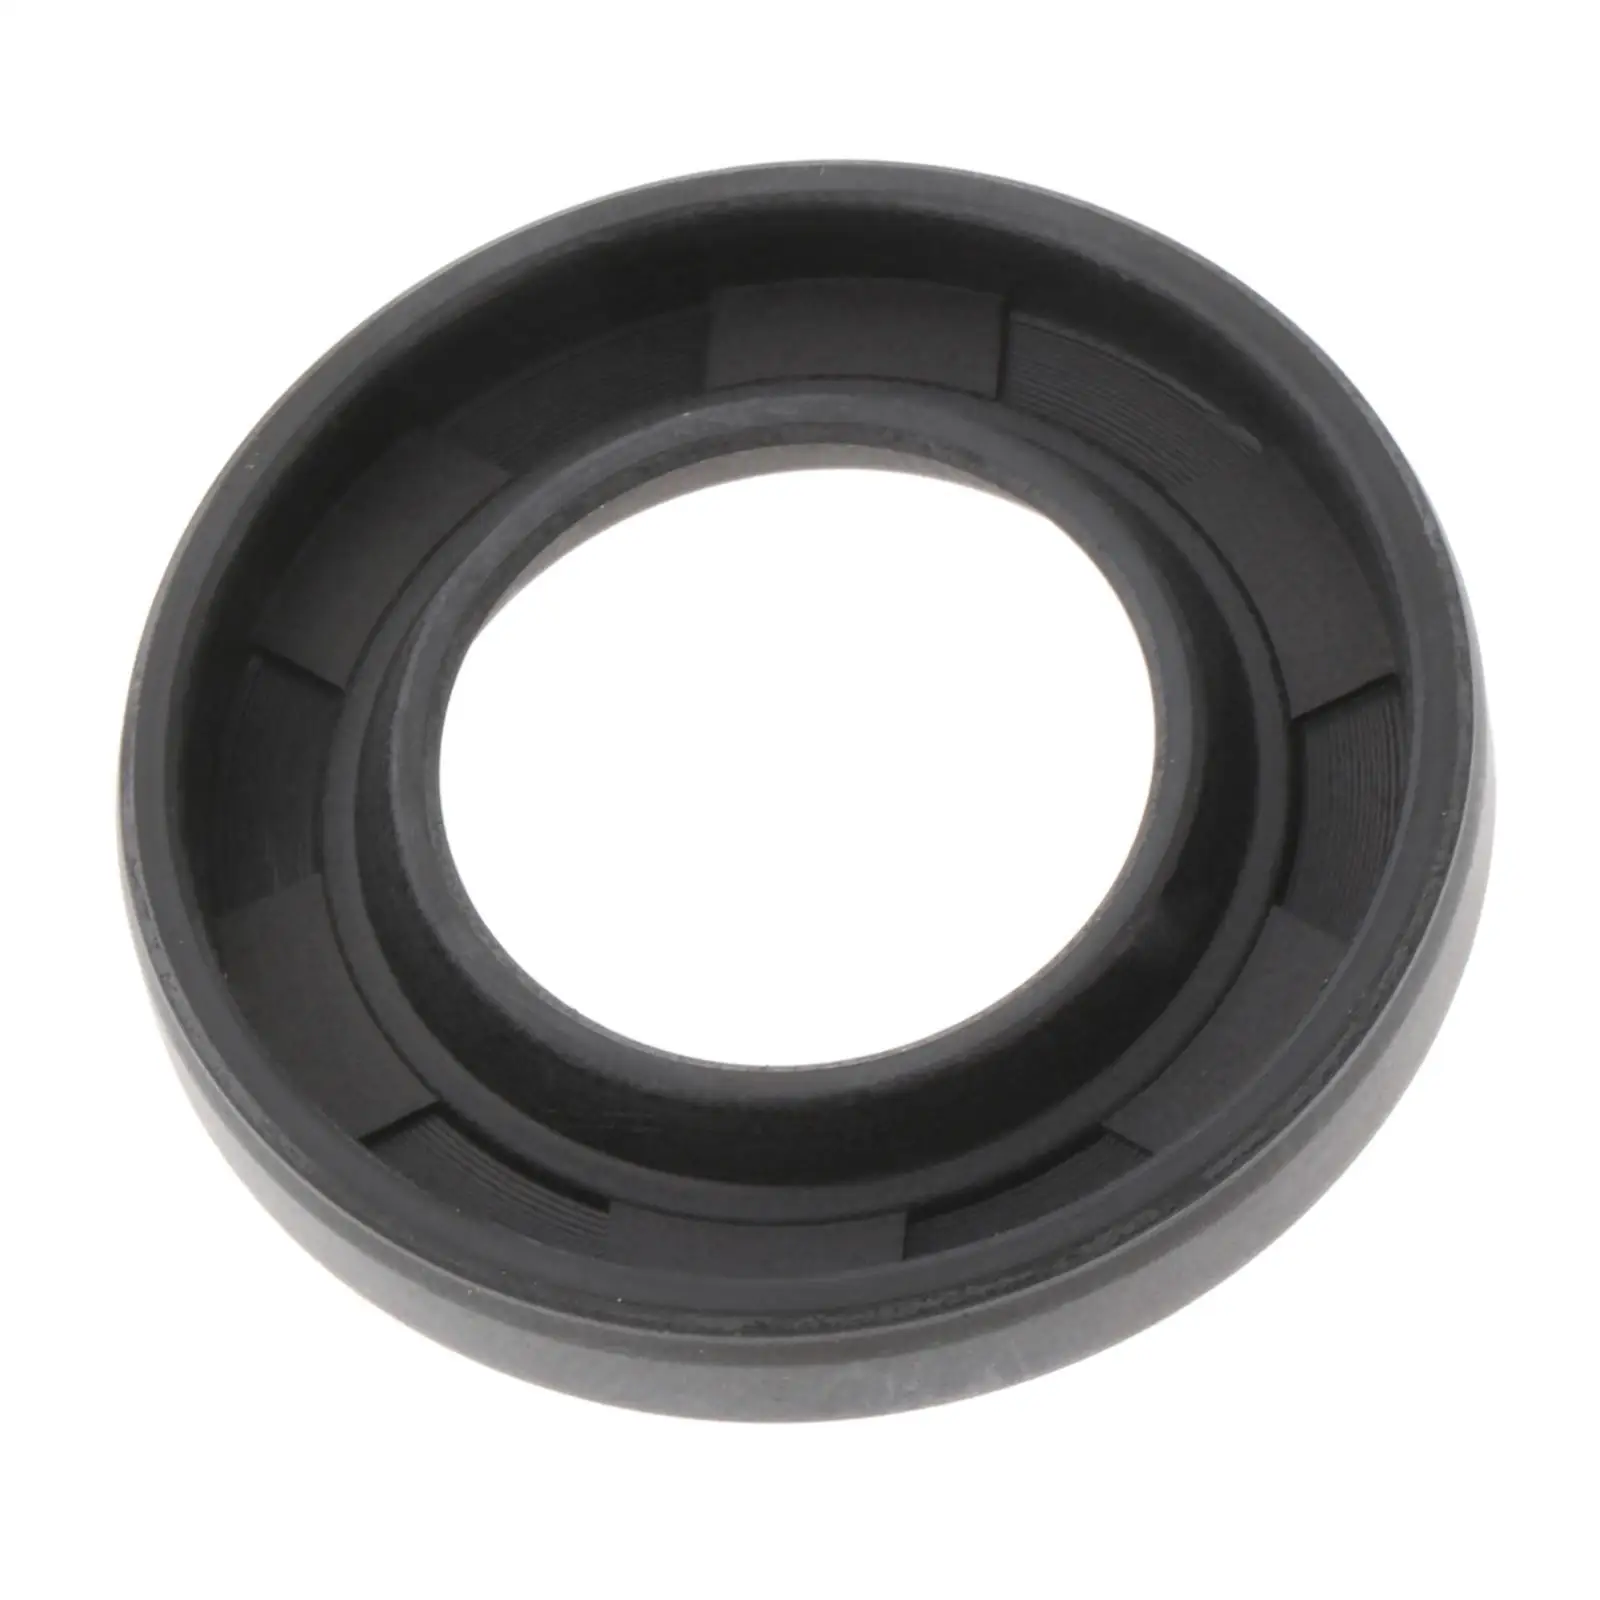 Oil Seal Replaces Fit for Yamaha Outboard 60HP 70HP Outboard Engine 2T 3cyl